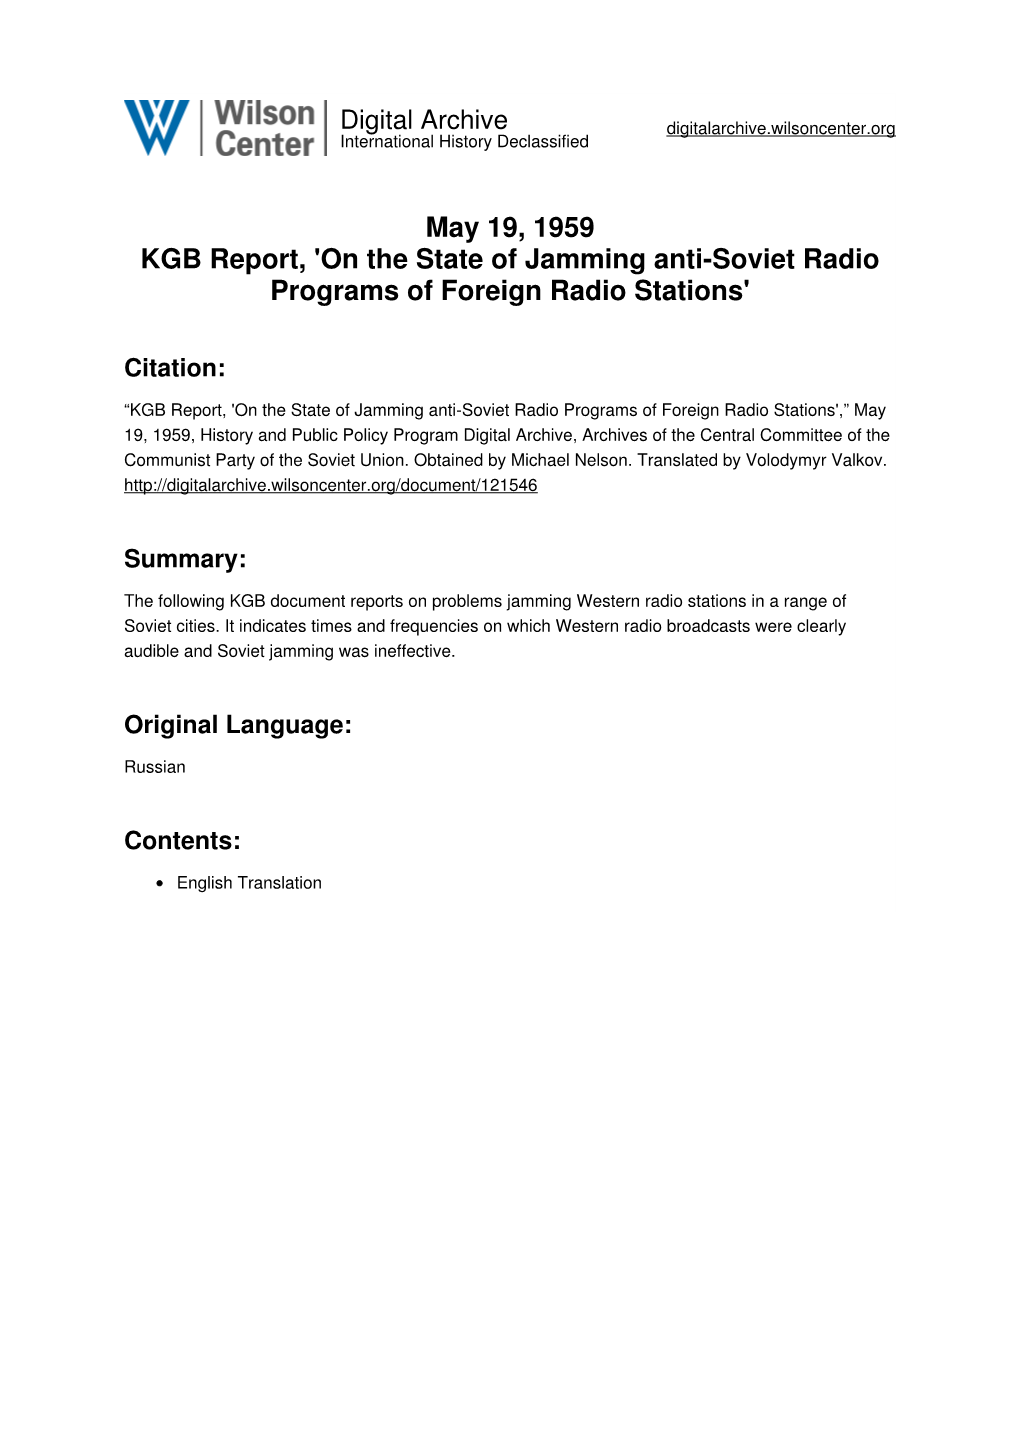 On the State of Jamming Anti-Soviet Radio Programs of Foreign Radio Stations'